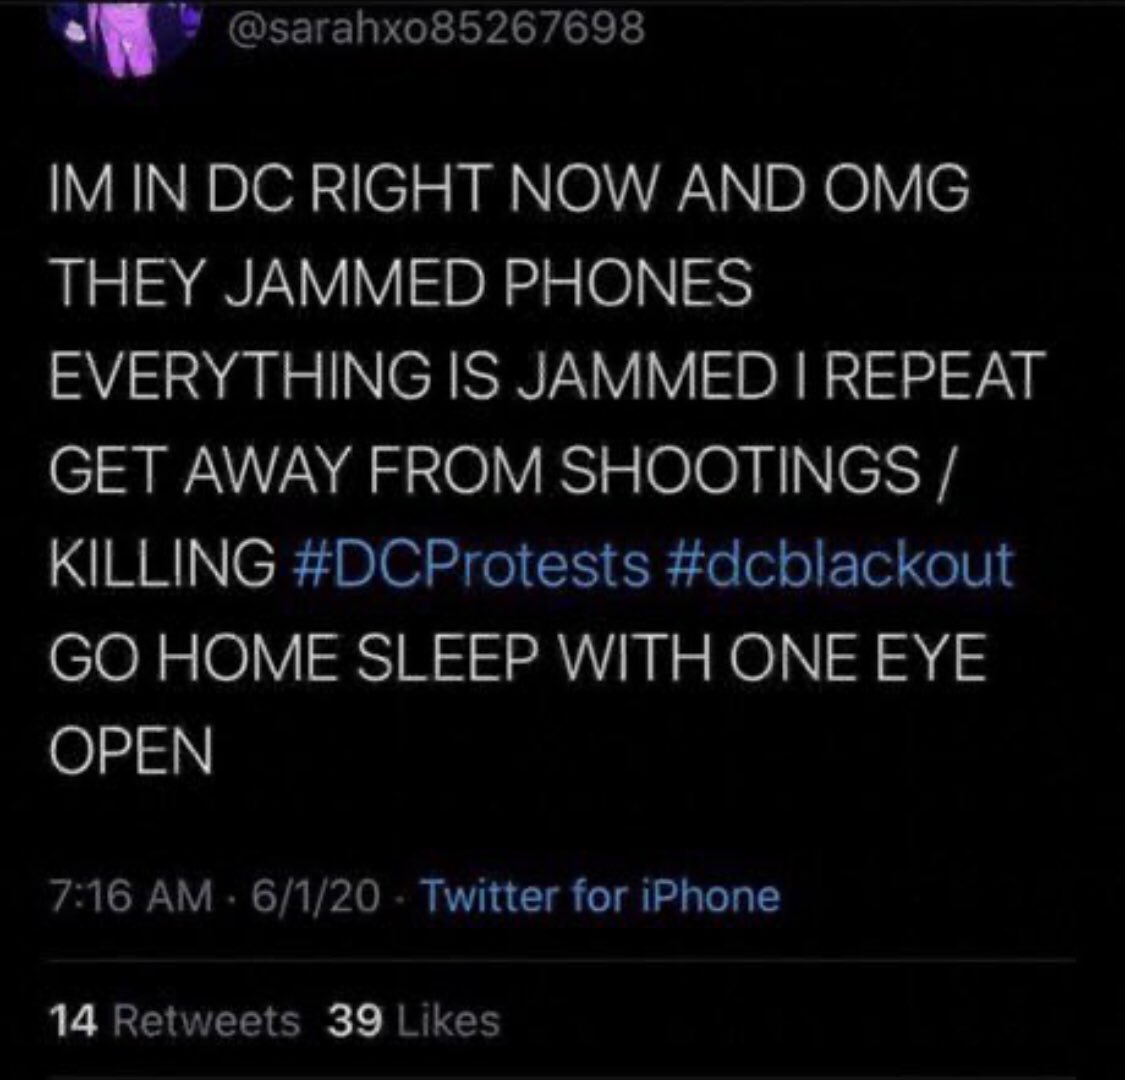 ALL THE INFORMATION I’VE GATHERED ON  #DCblackout WILL BE POSTED ON THIS THREAD, AND I WILL CONTINUE TO UPDATE THIS THREAD. PLEASE, IF YOU SEE ANY POSTS, ANY VIDEOS OR PHOTOS OF THE PROTESTS, SPREAD THEM!! TWITTER IS DELETING THEM AS THE GOVERNMENT IS TRYING TO HIDE THEM!!